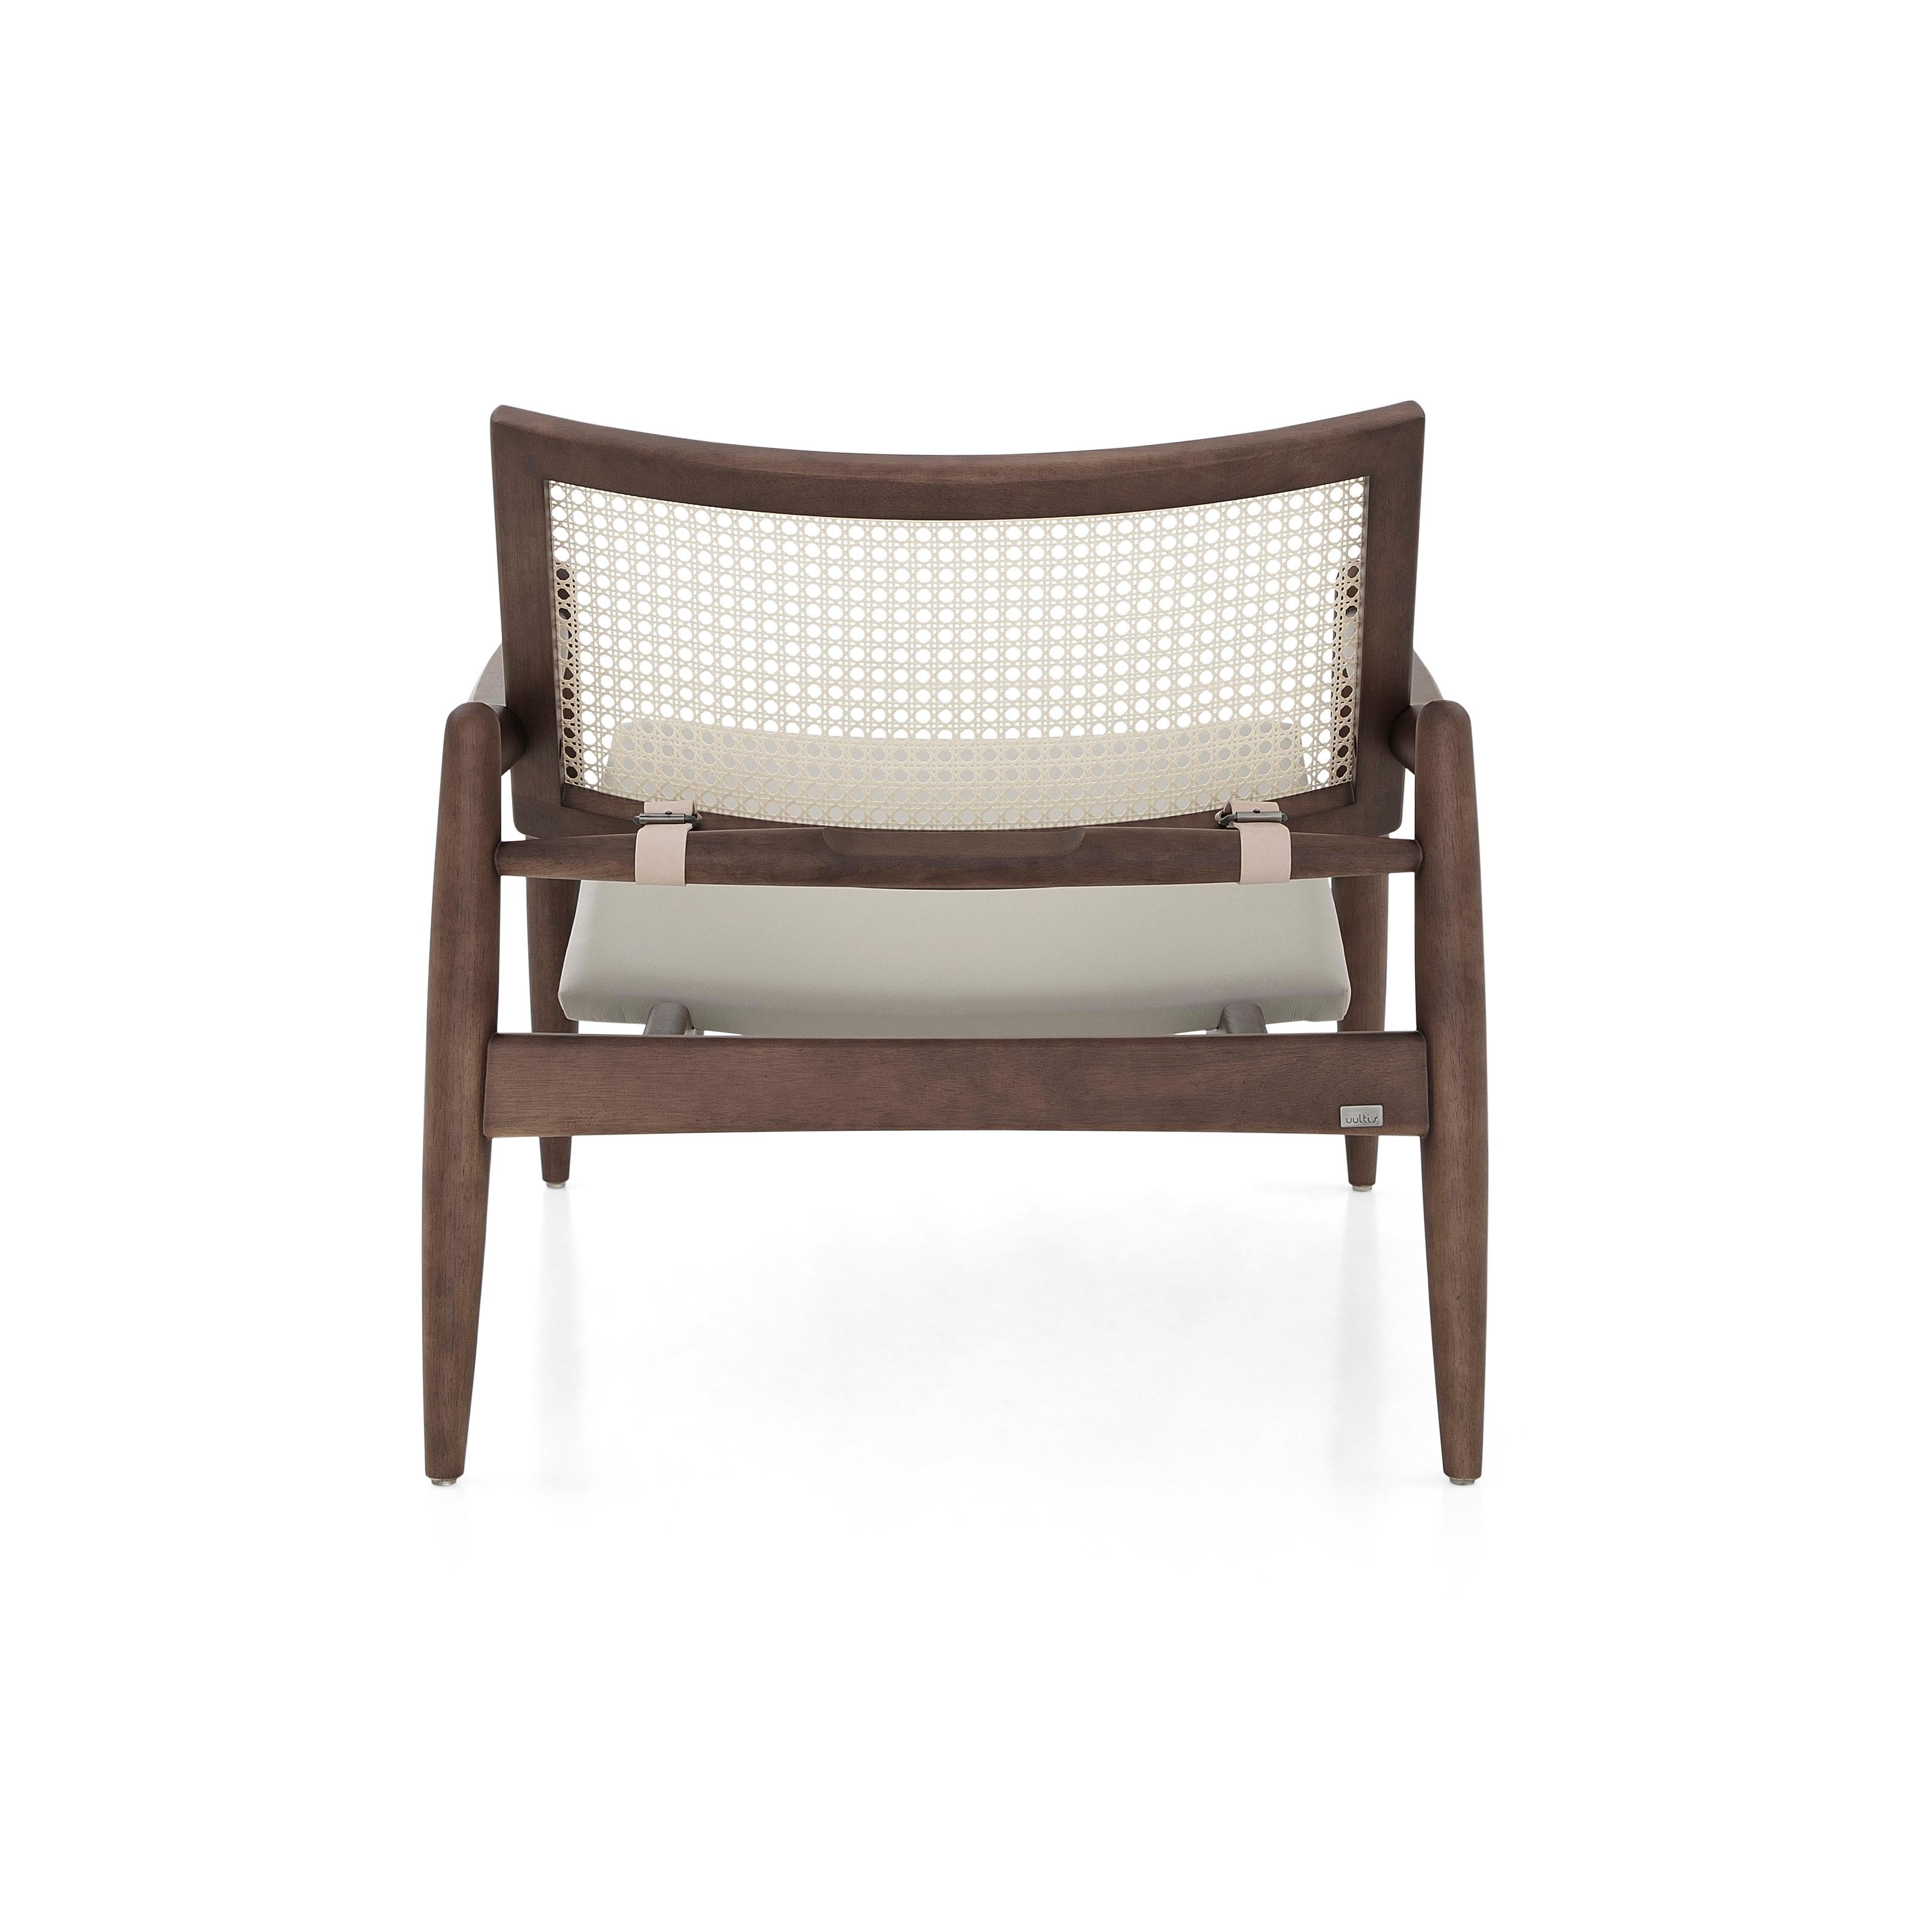 Brazilian Soho Curved Cane-Back Chair in Walnut Wood Finish with Gray Leather Chair Seat For Sale